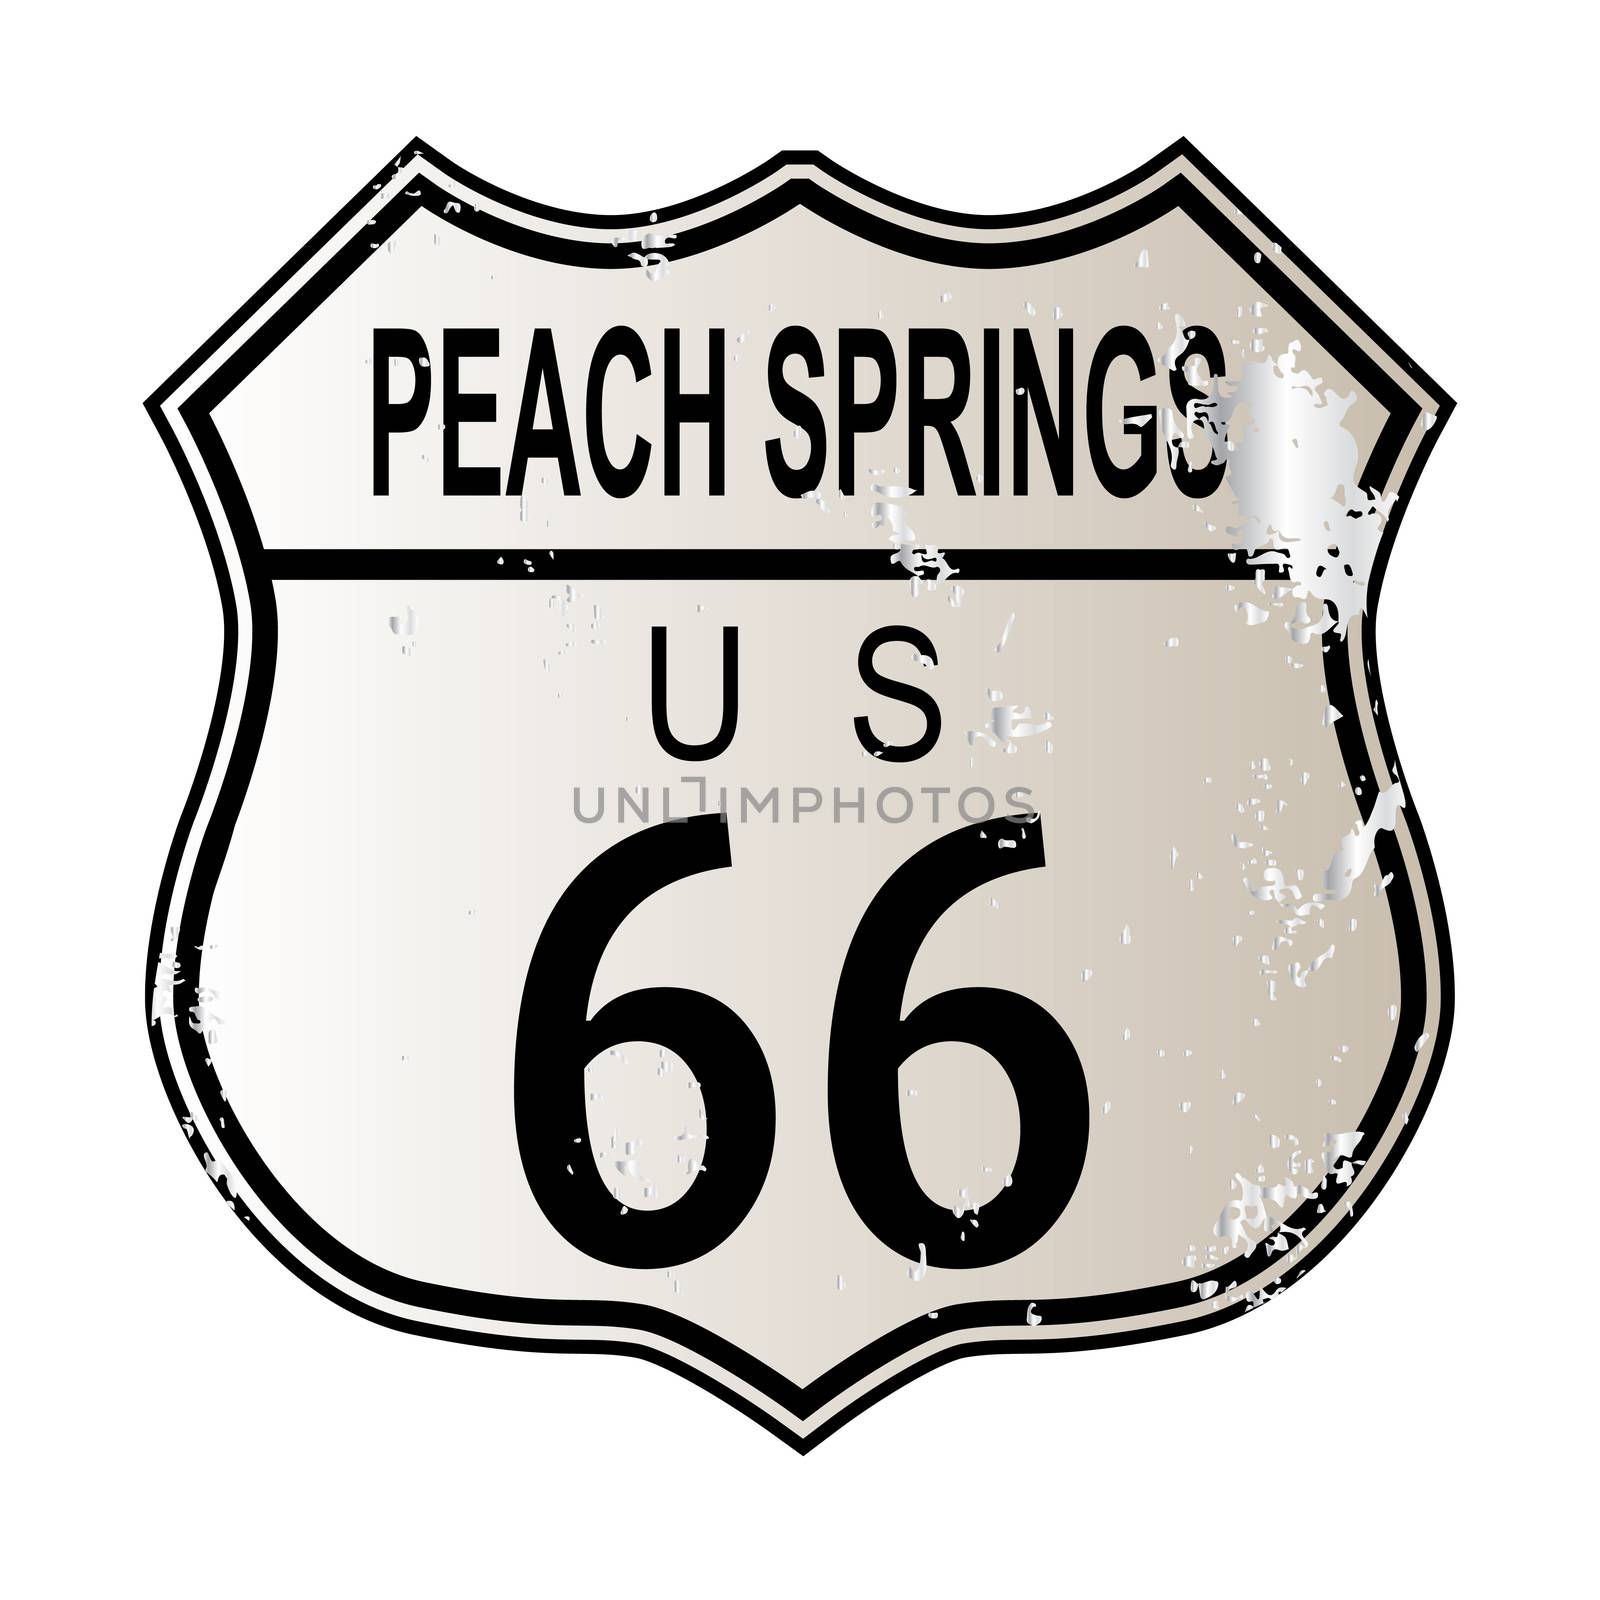 Peach Springs Route 66 traffic sign over a white background and the legend ROUTE US 66